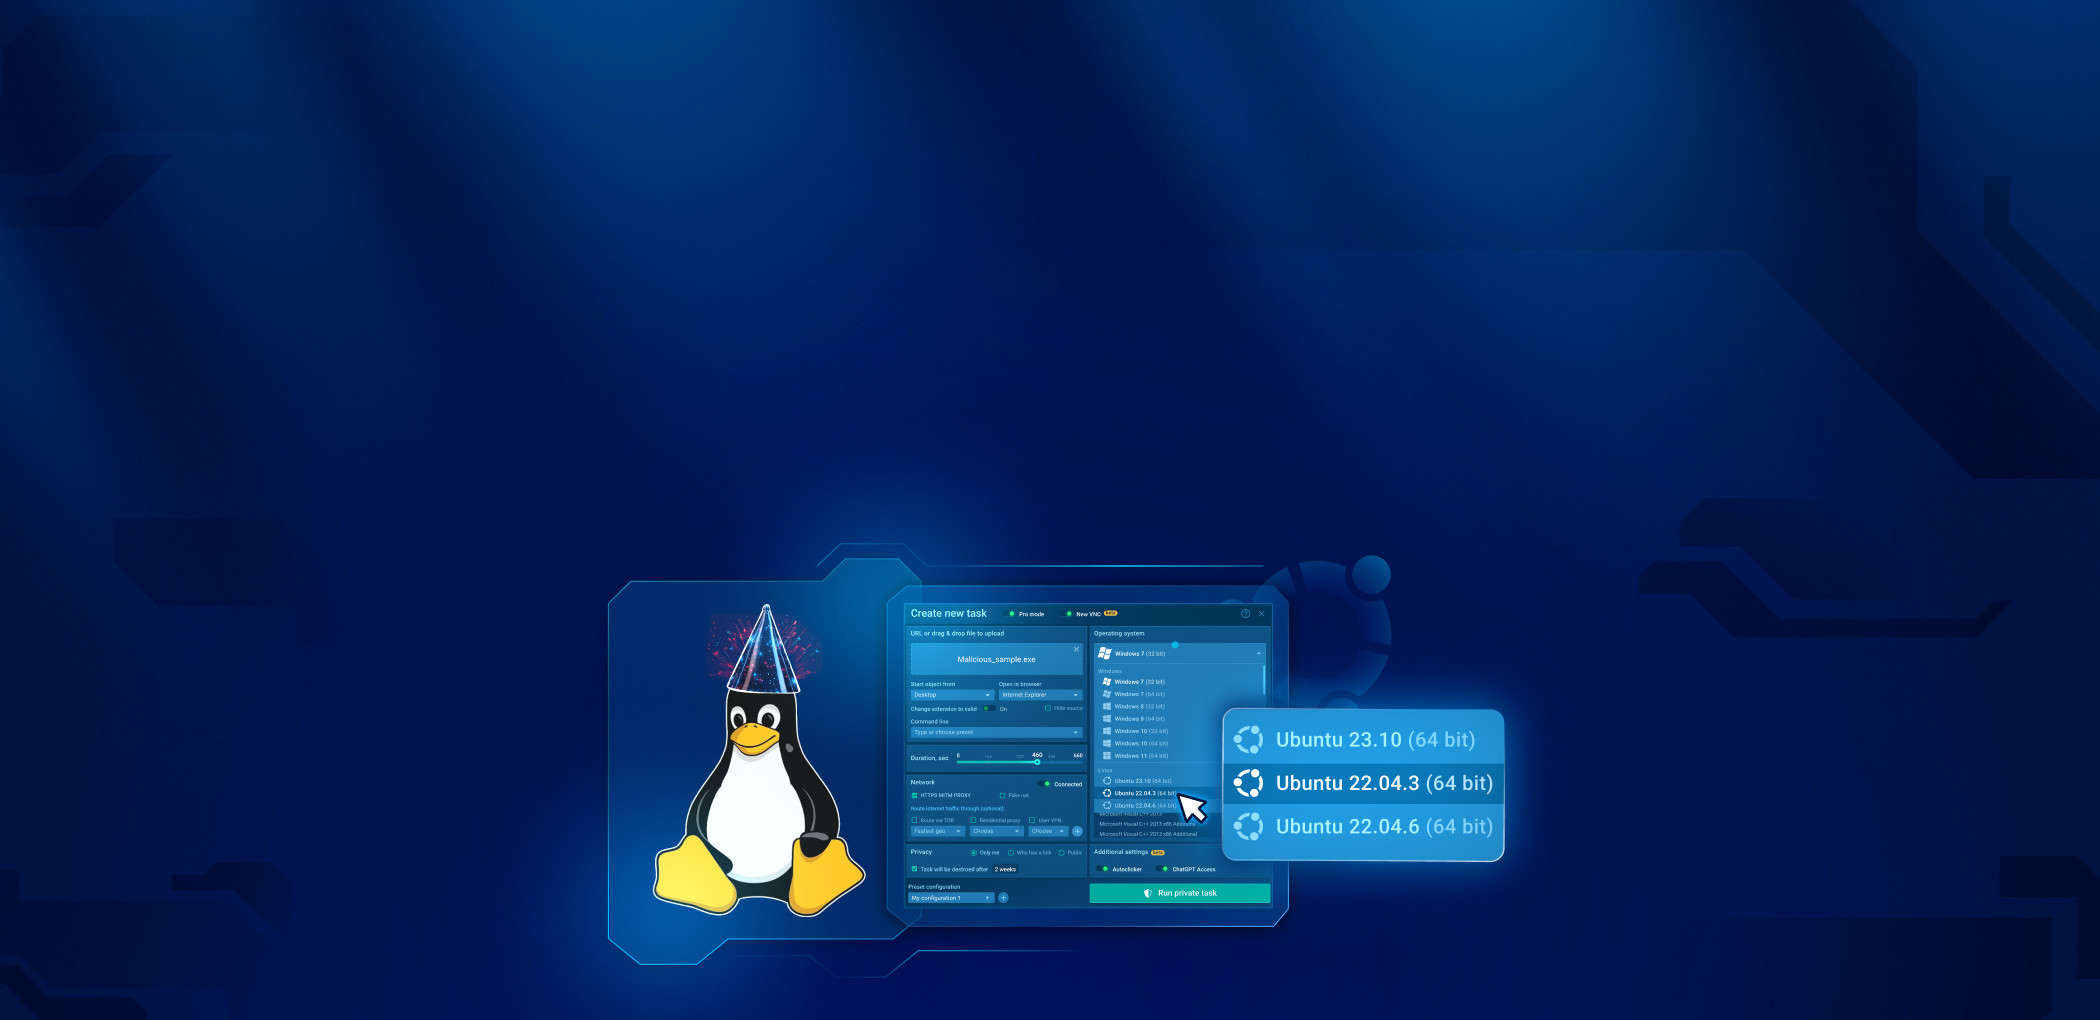 Linux is now Available in ANY.RUN: We’ve Expanded Our Sandbox Capabilities  